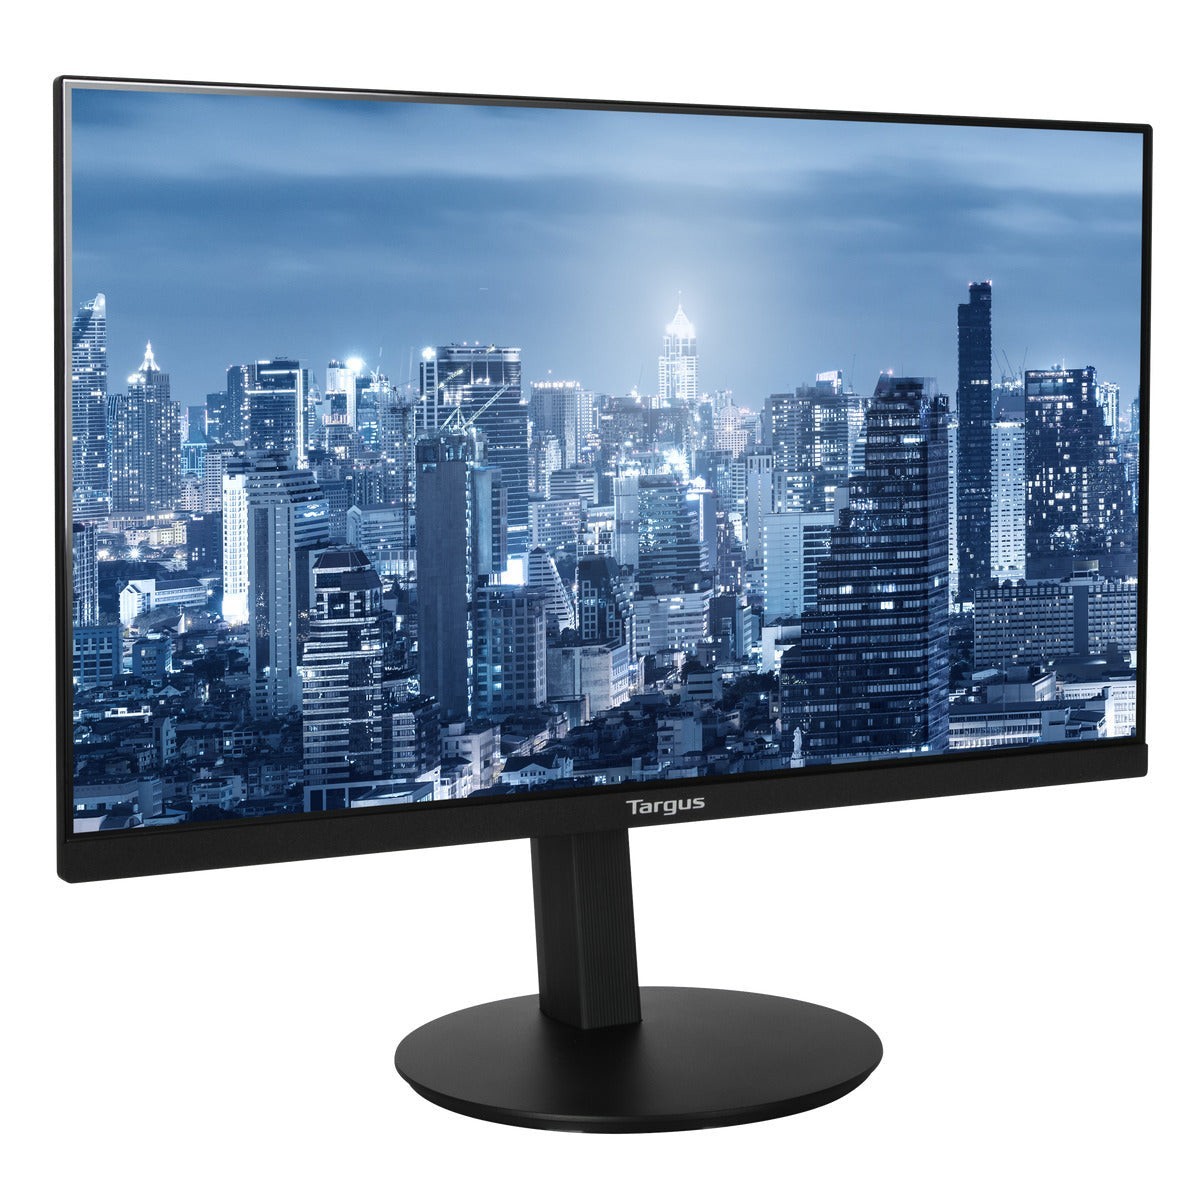 Targus 23.8in Secondary HD Monitor Dock